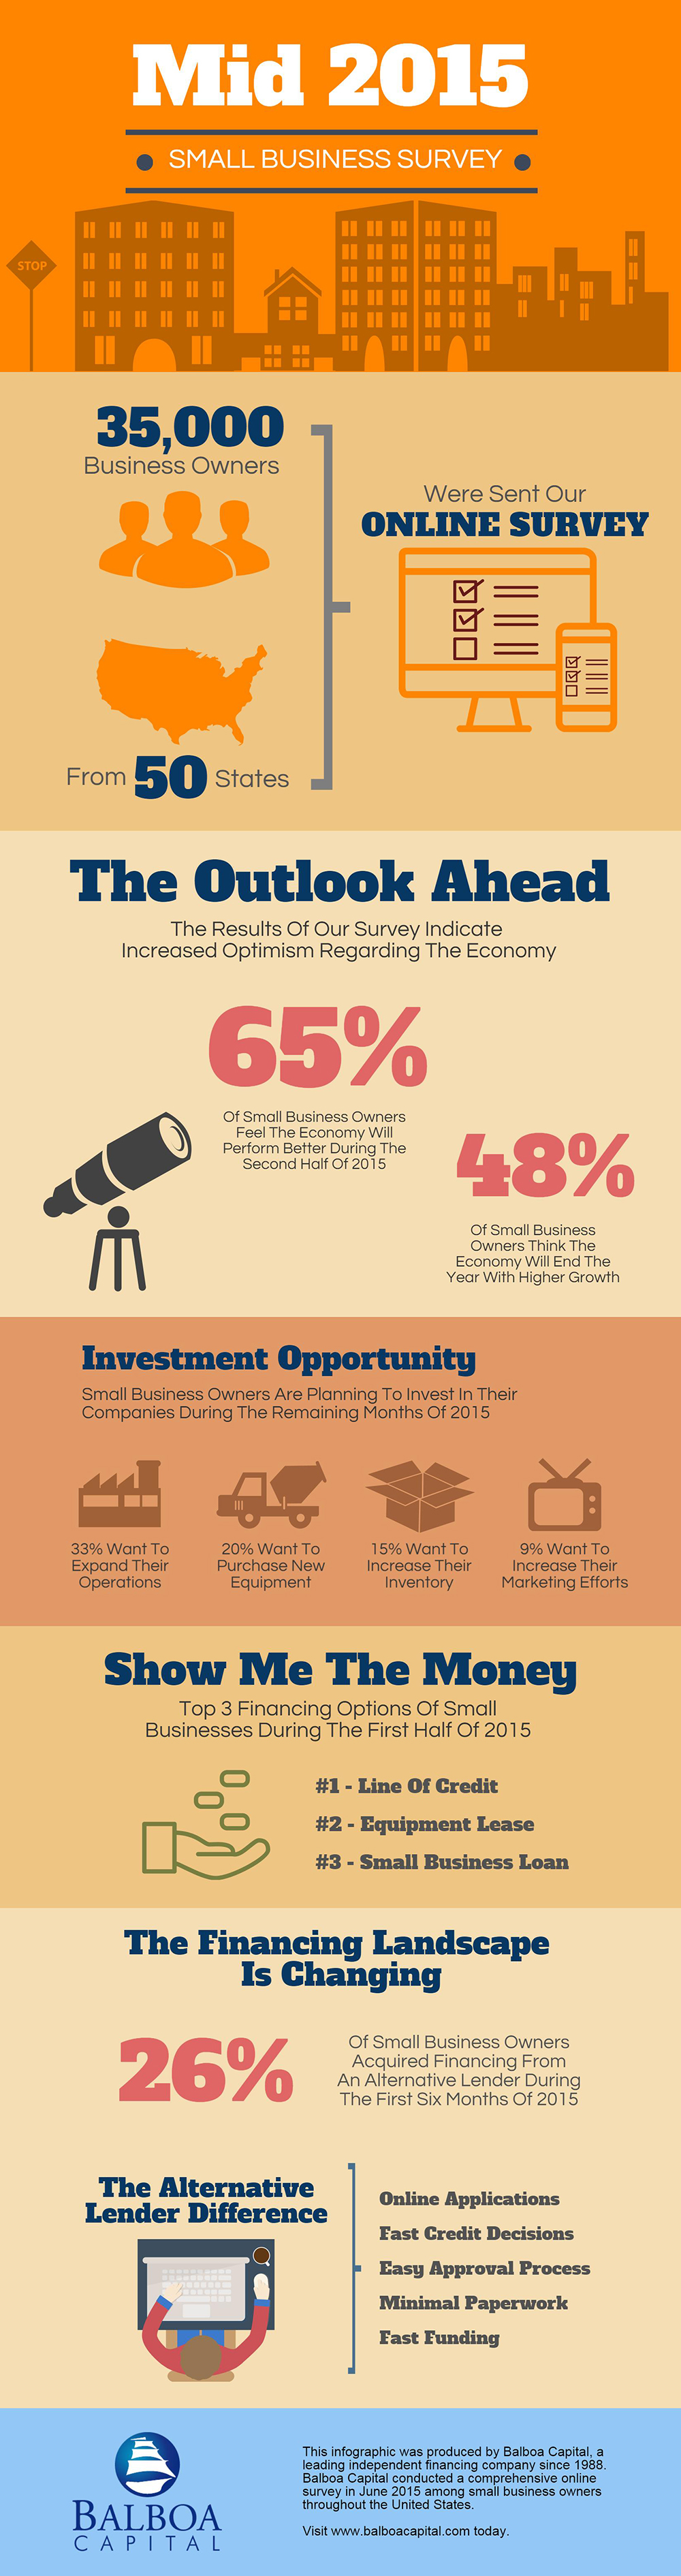 Mid-2015 Small Business Survey Infographic from Balboa Capital